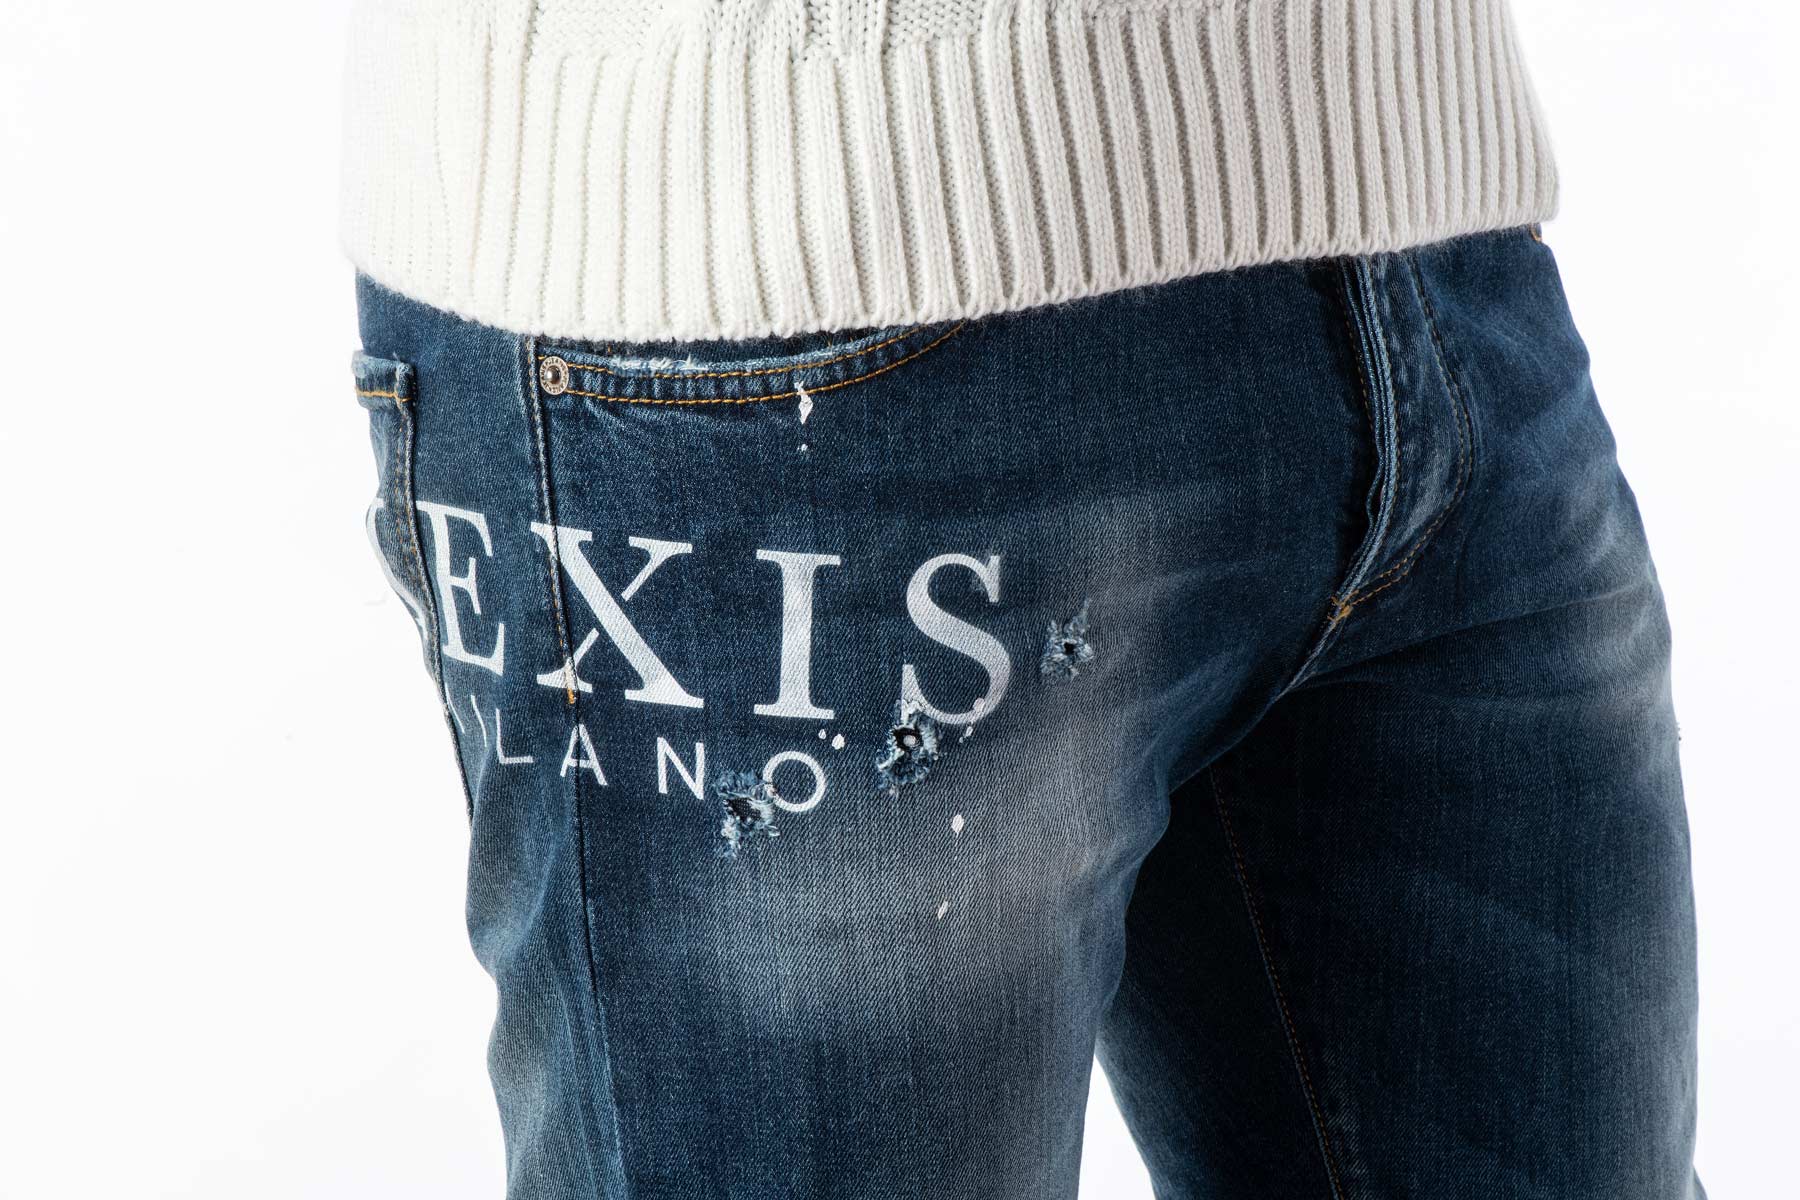 Baker HEXIS stretch jeans with logo